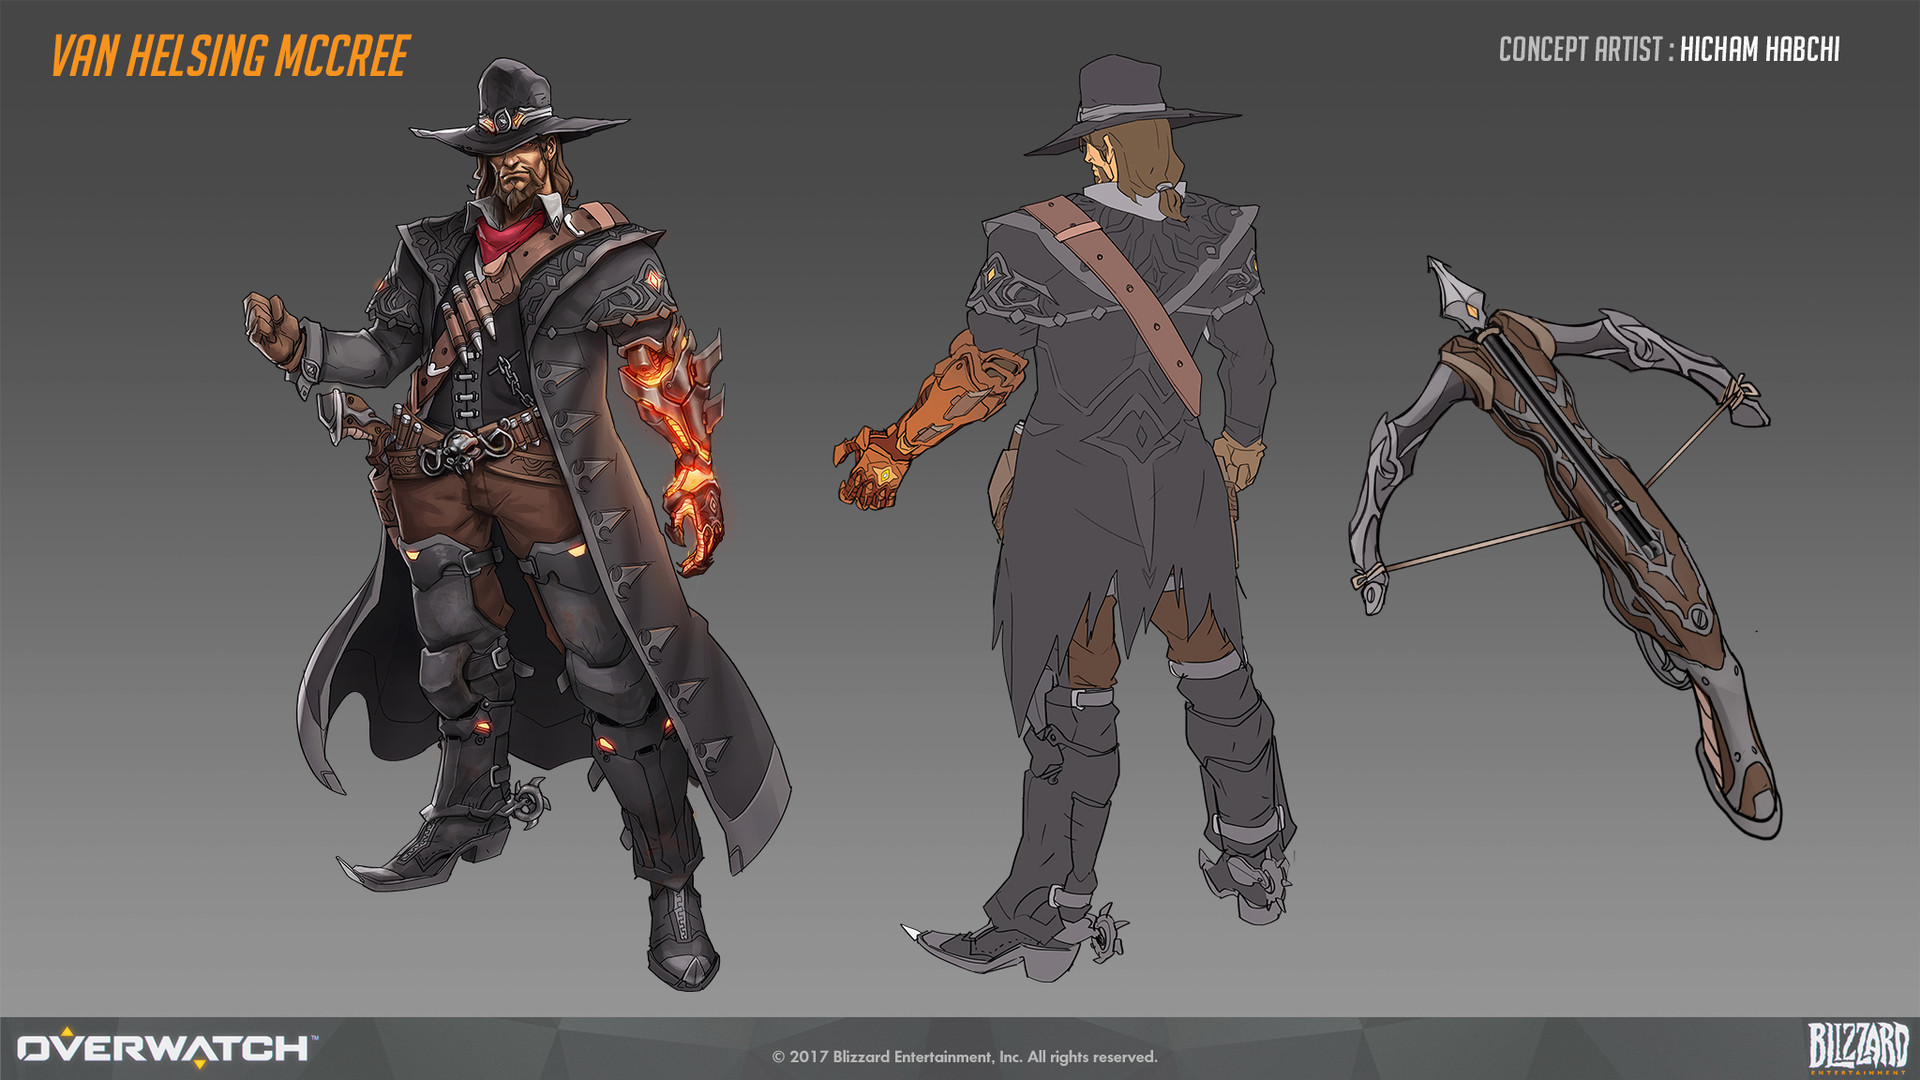 Overwatch Halloween Terror Skin Concepts Hicham Habchi Super Humbled To Finally Be Able To Share Some Of The Skin Concepts I Did For The Overwatch Game I Had Fun Designing Some